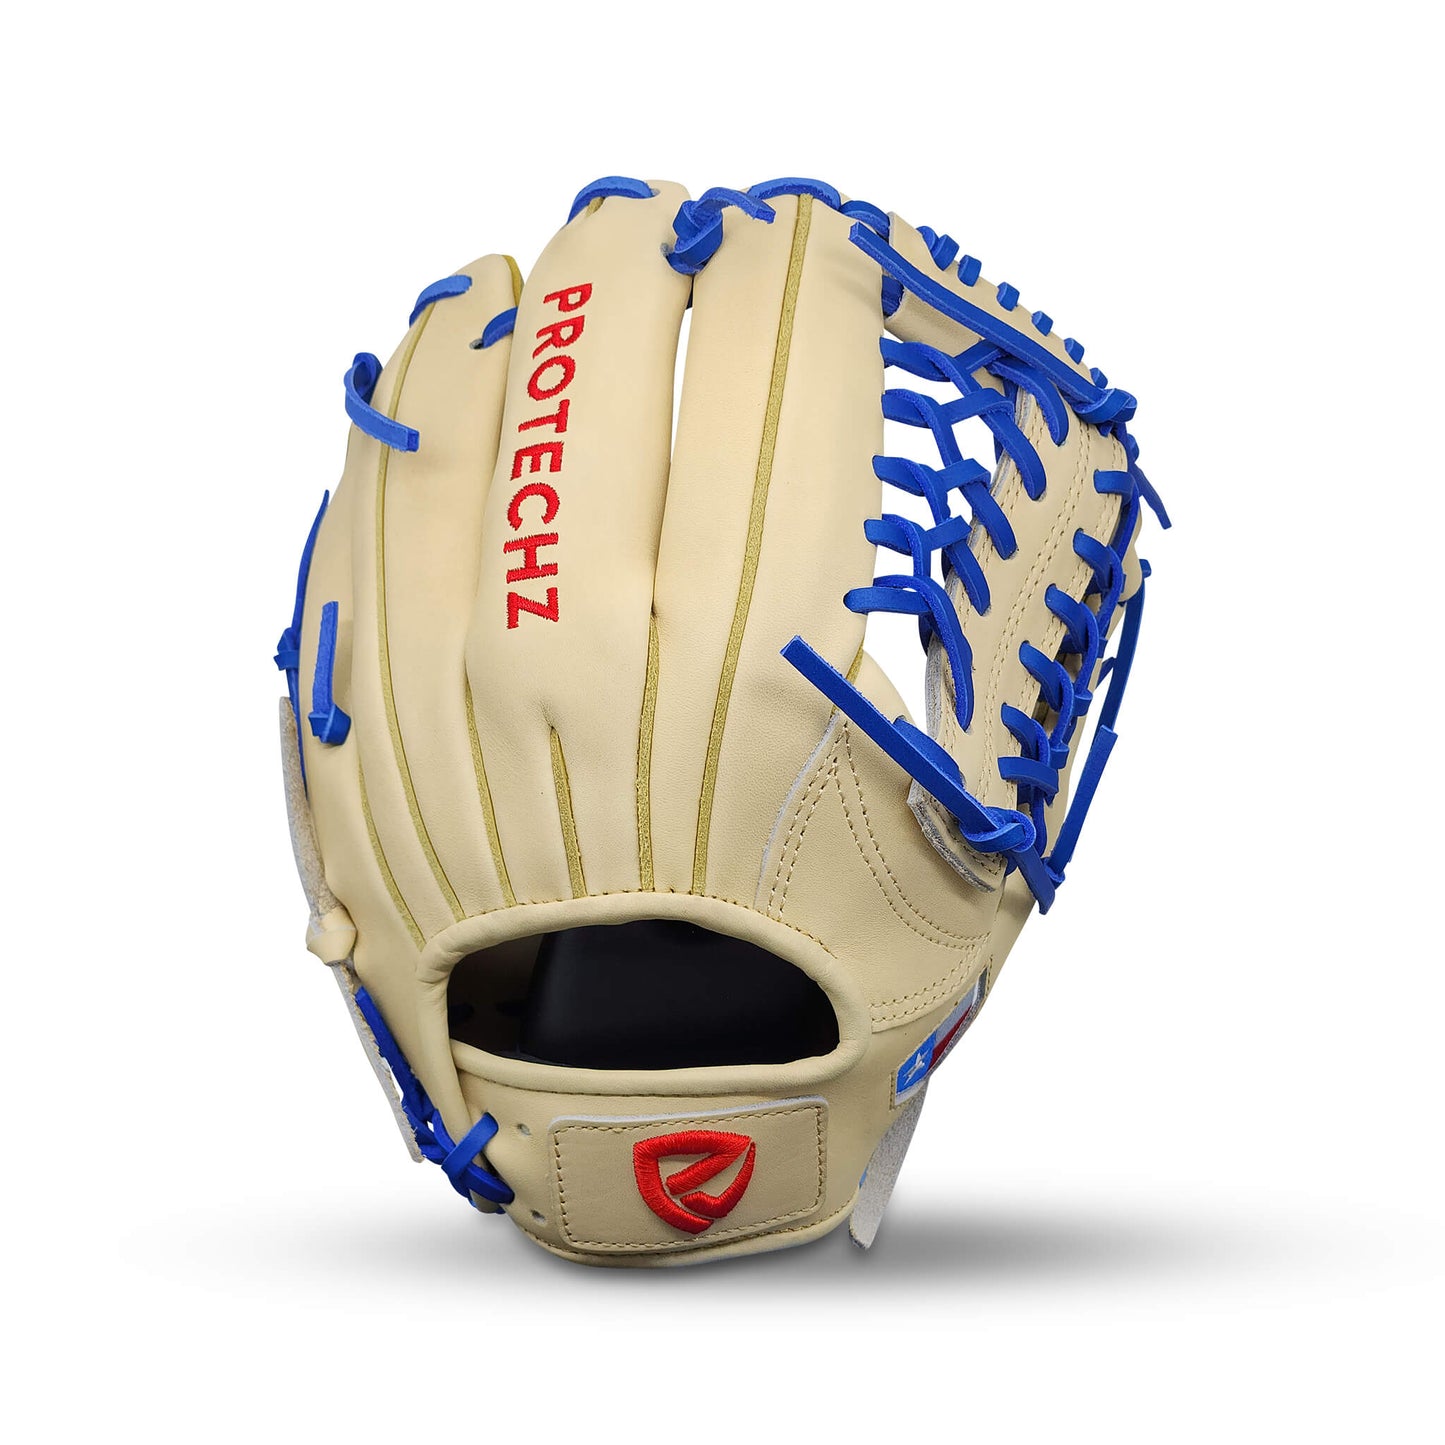 Titan Series Limited Edition 11.75” Infield Glove with T-Web, Camel Shell and Palm, Royal Blue Lacing, and Embroidered Texas Flag – RHT